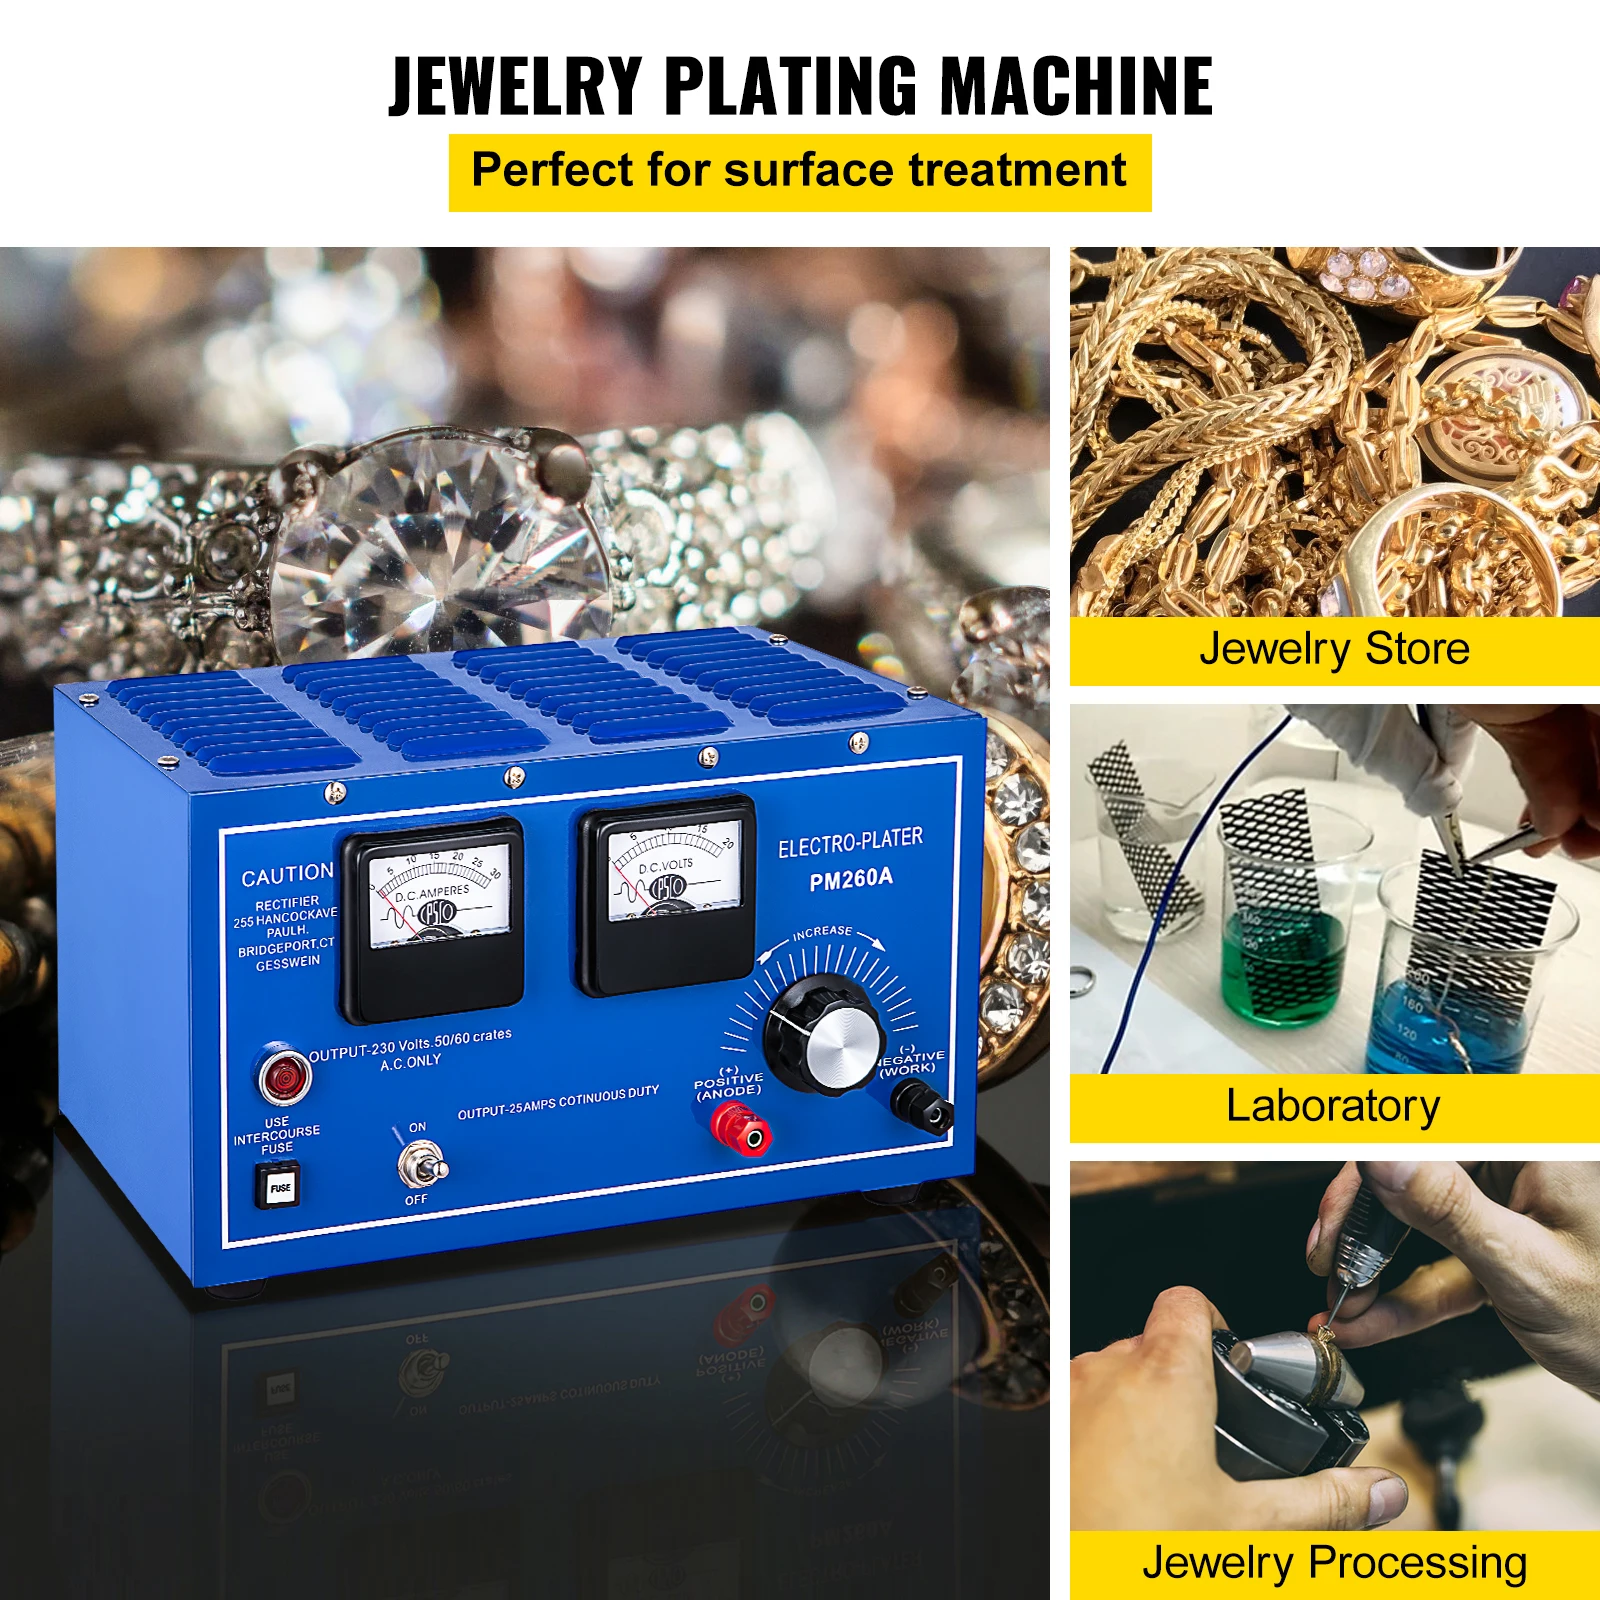  Jewelry Gold Plating Kit, 110V Jewelry Plating Machine, Gold  and Silver Electroplating Equipment Tools, Adjustable Voltage, Overcurrent  Protection, for cCopper, Nickel, Chromium, Gold, Silver